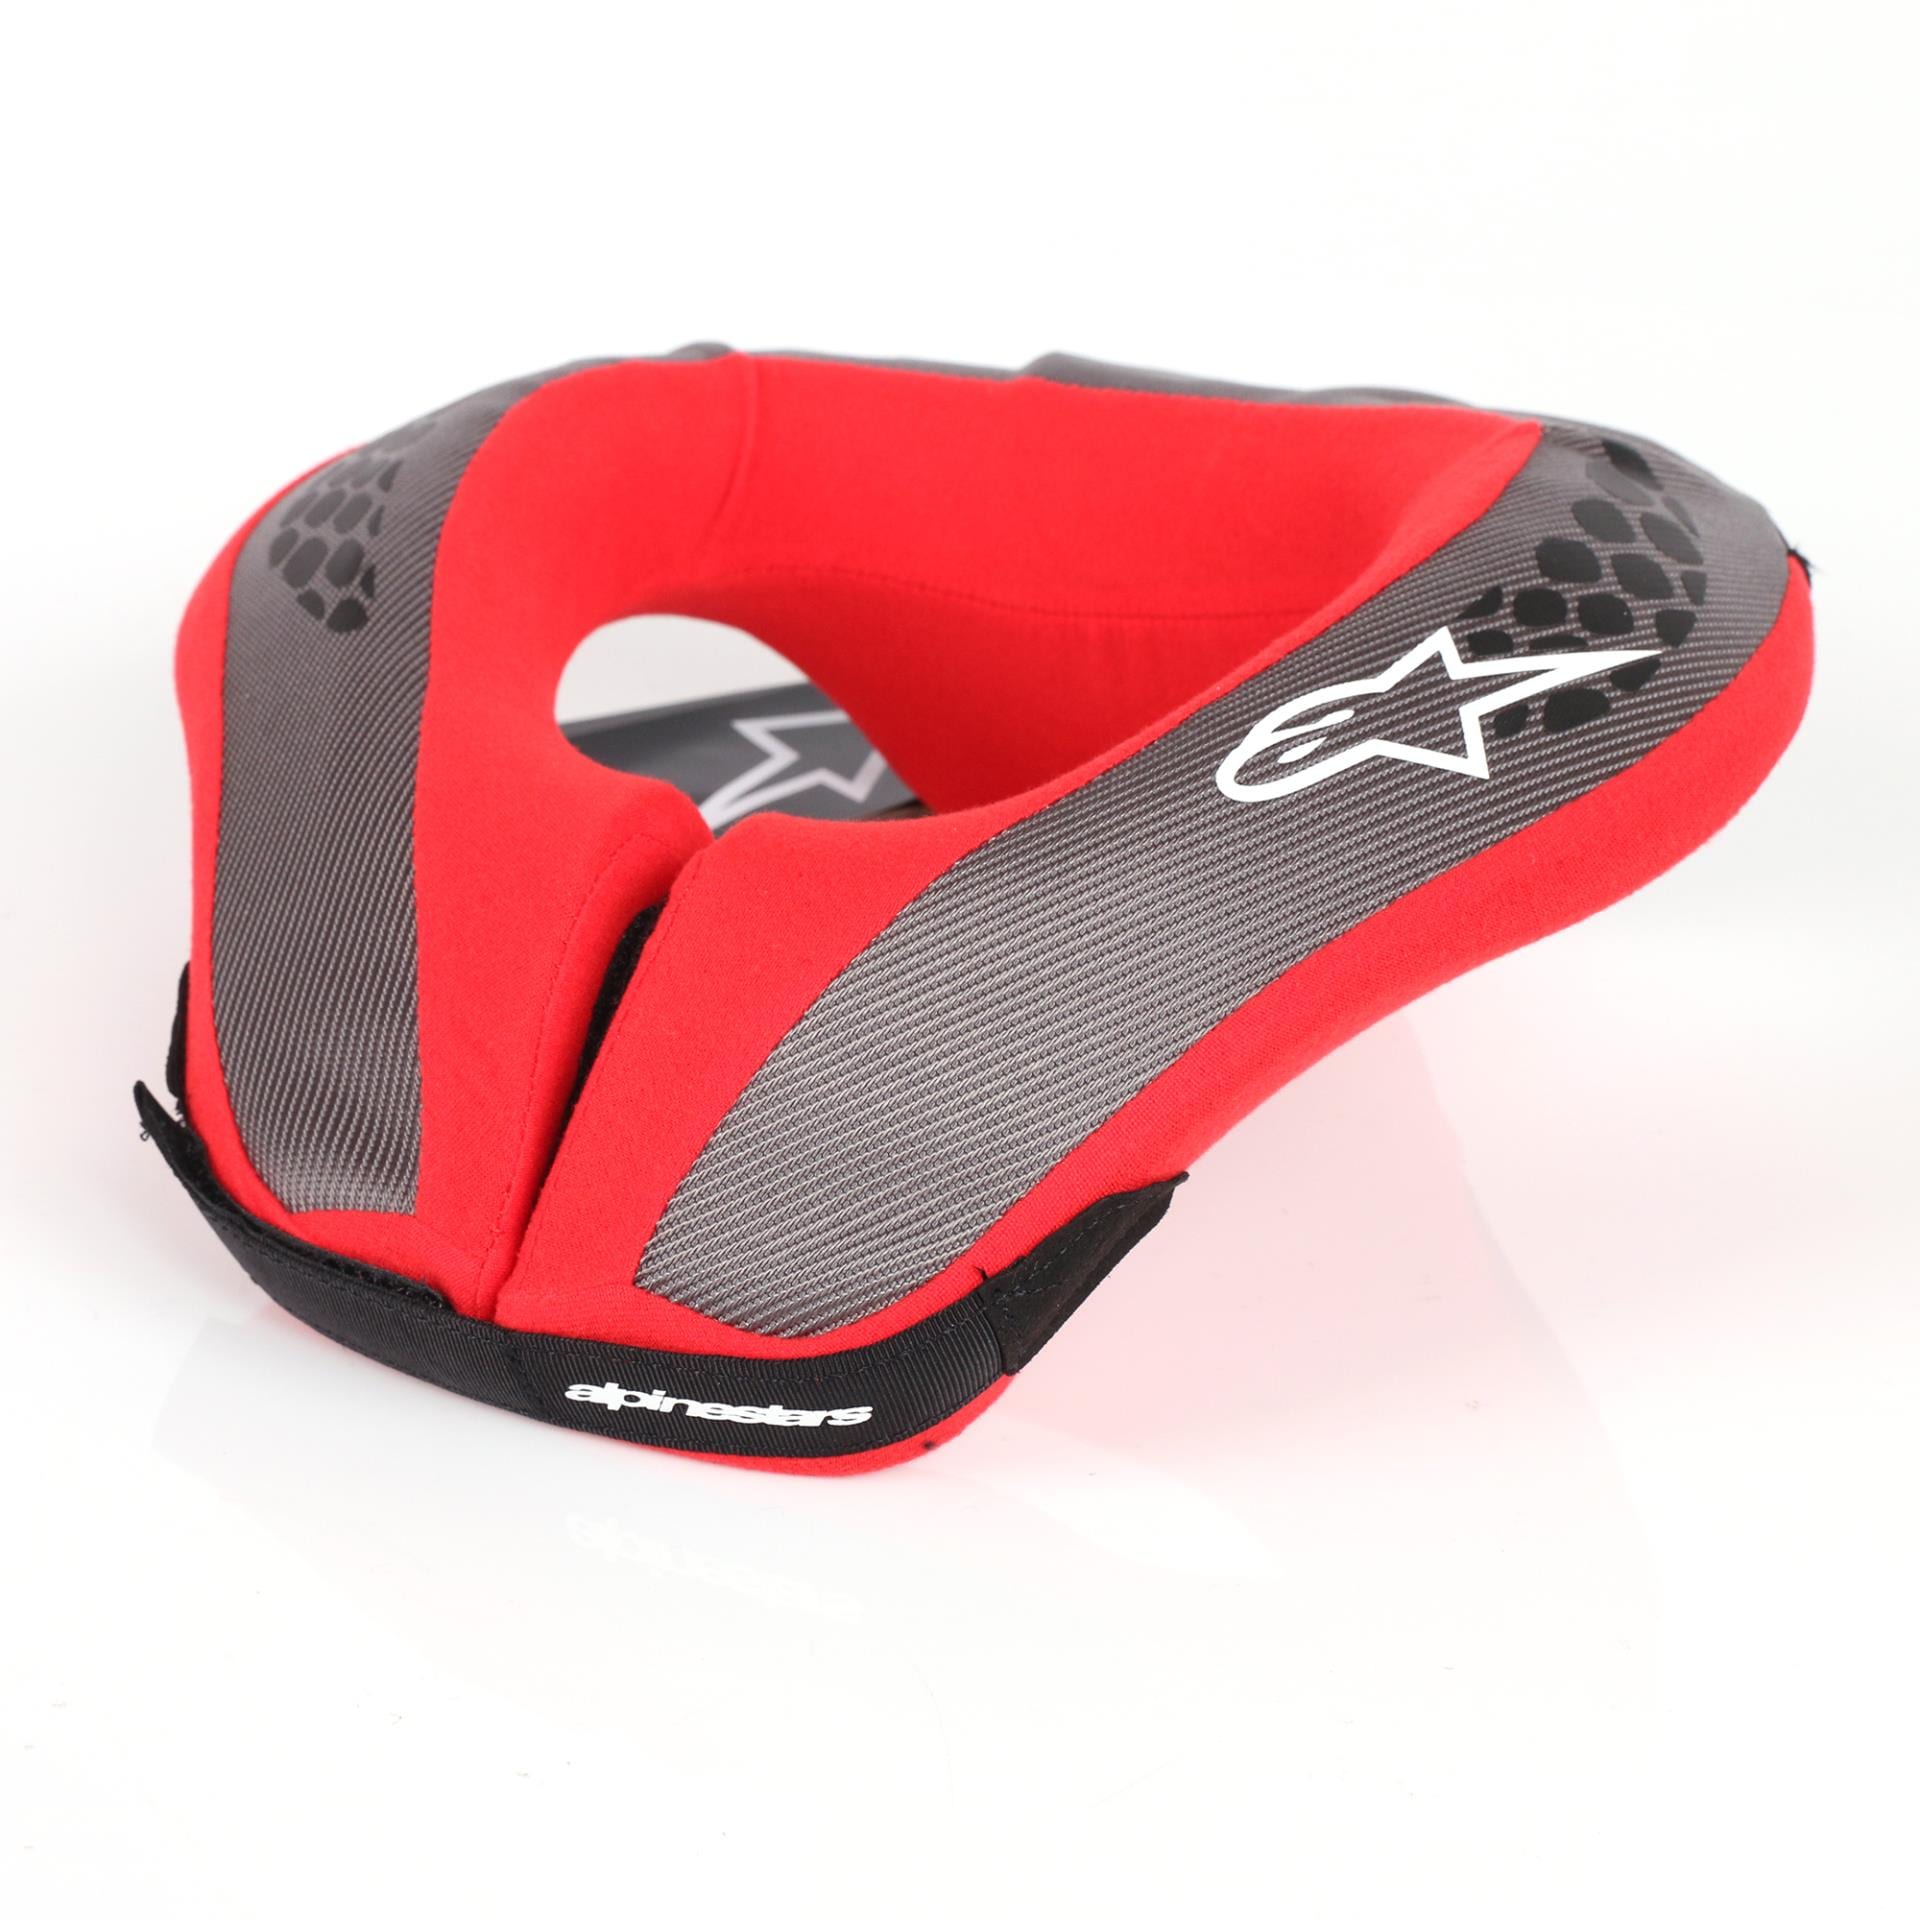 Neckprotection Sequence Youth Red